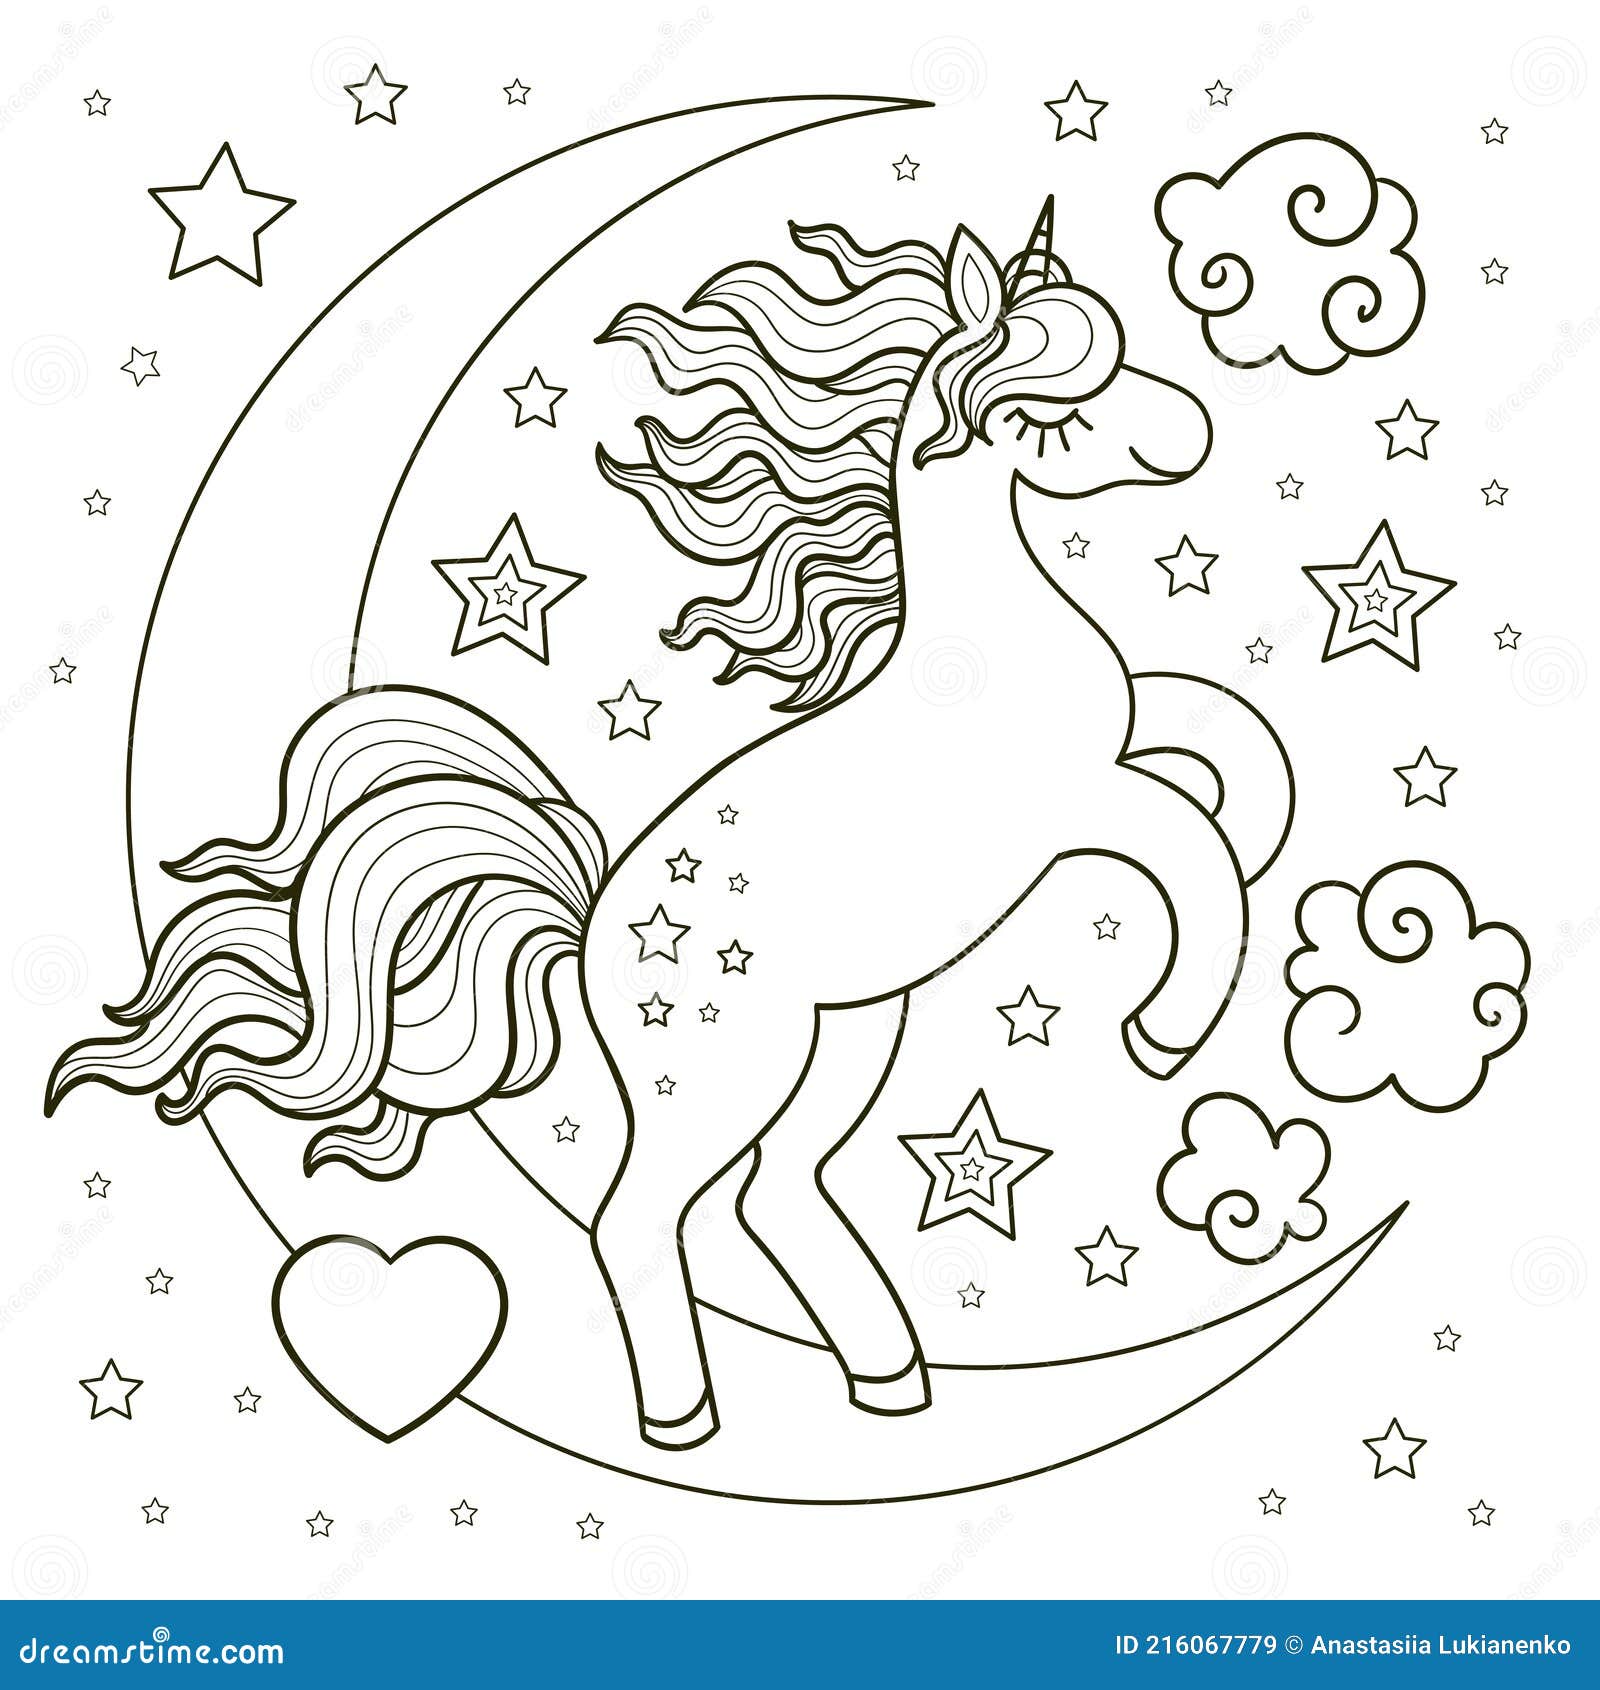 Unicorn On The Moon Among The Stars. Linear Drawing For Coloring ...